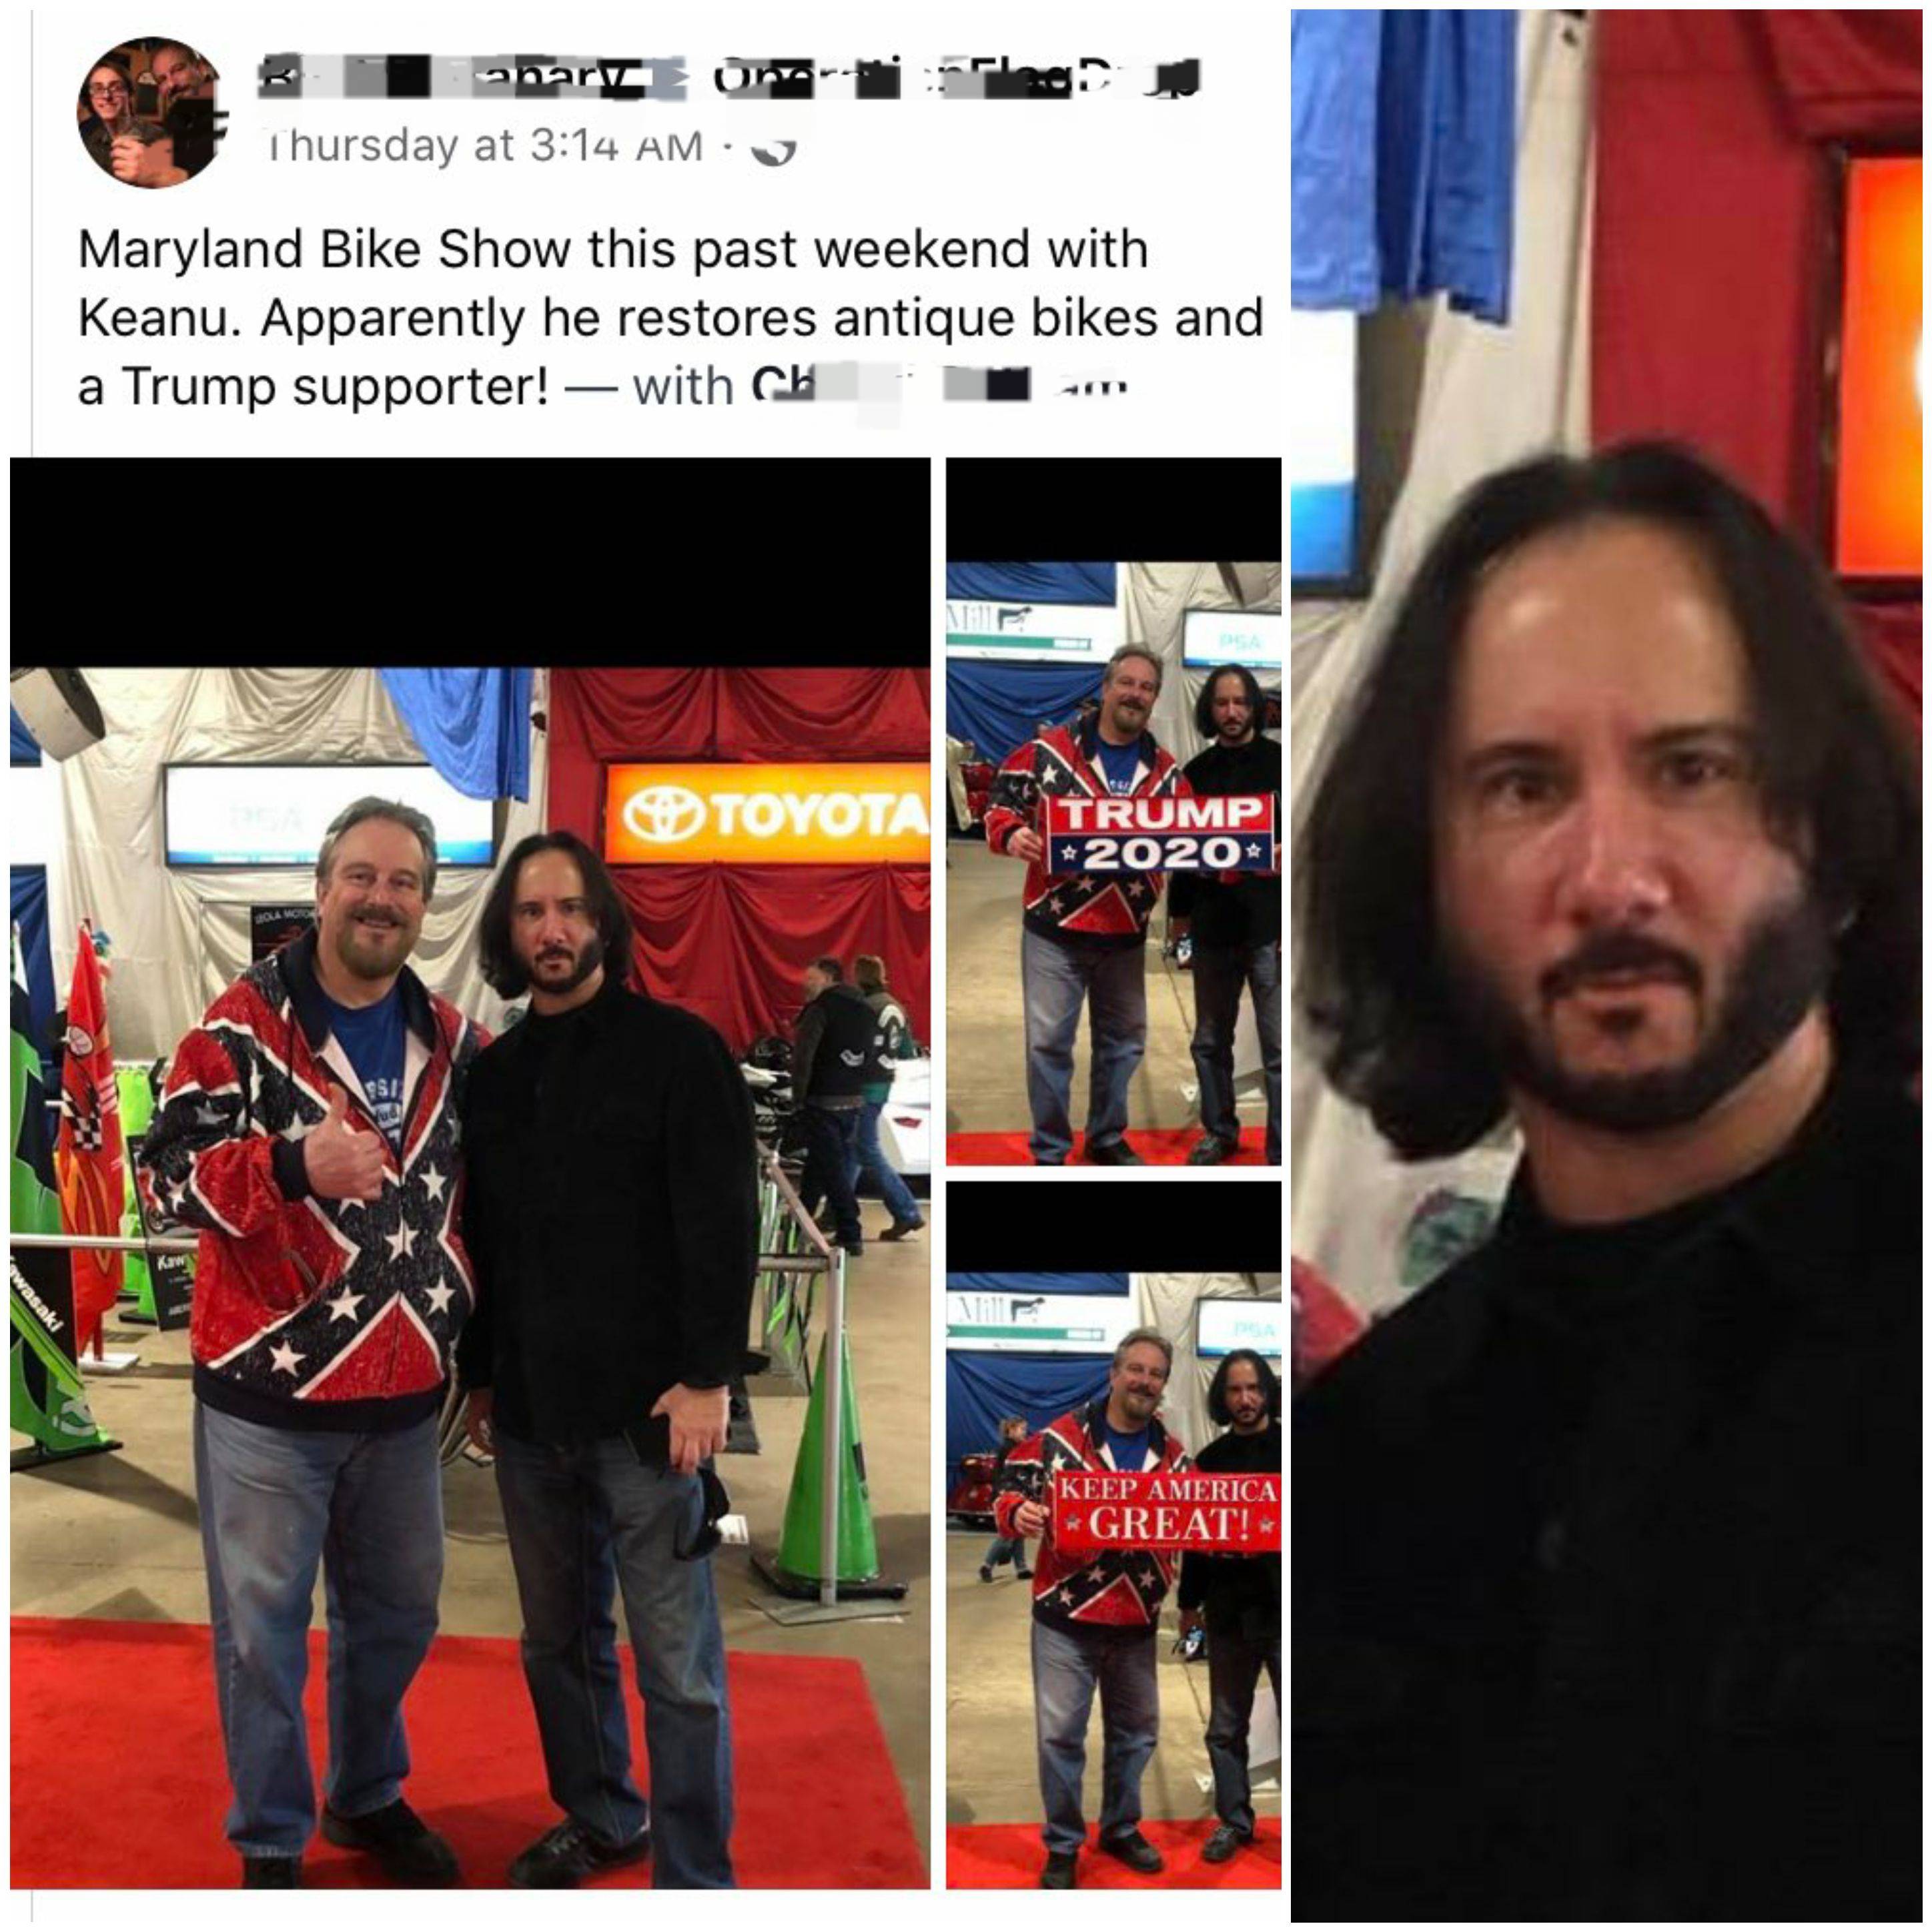 Keanu cosplay is getting way out of hand.